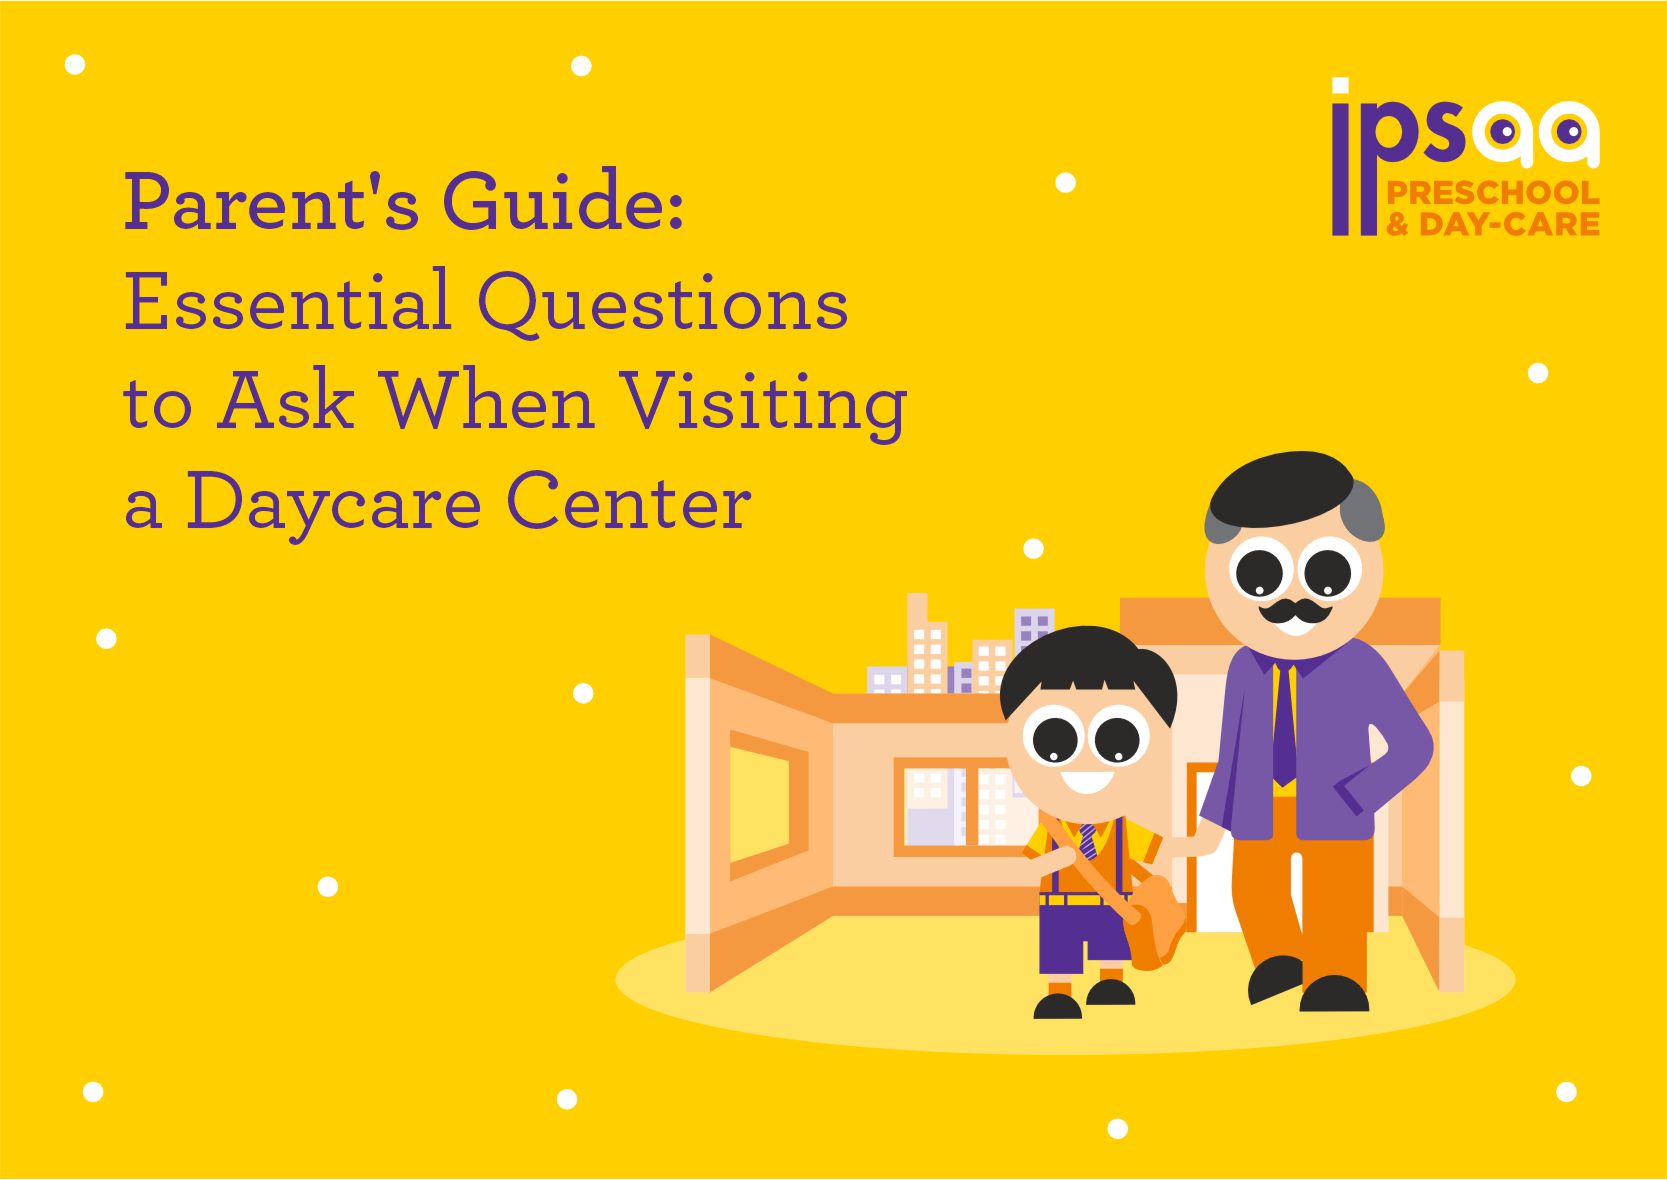 Parent’s Guide: Essential Questions to Ask When Visiting a Daycare Center